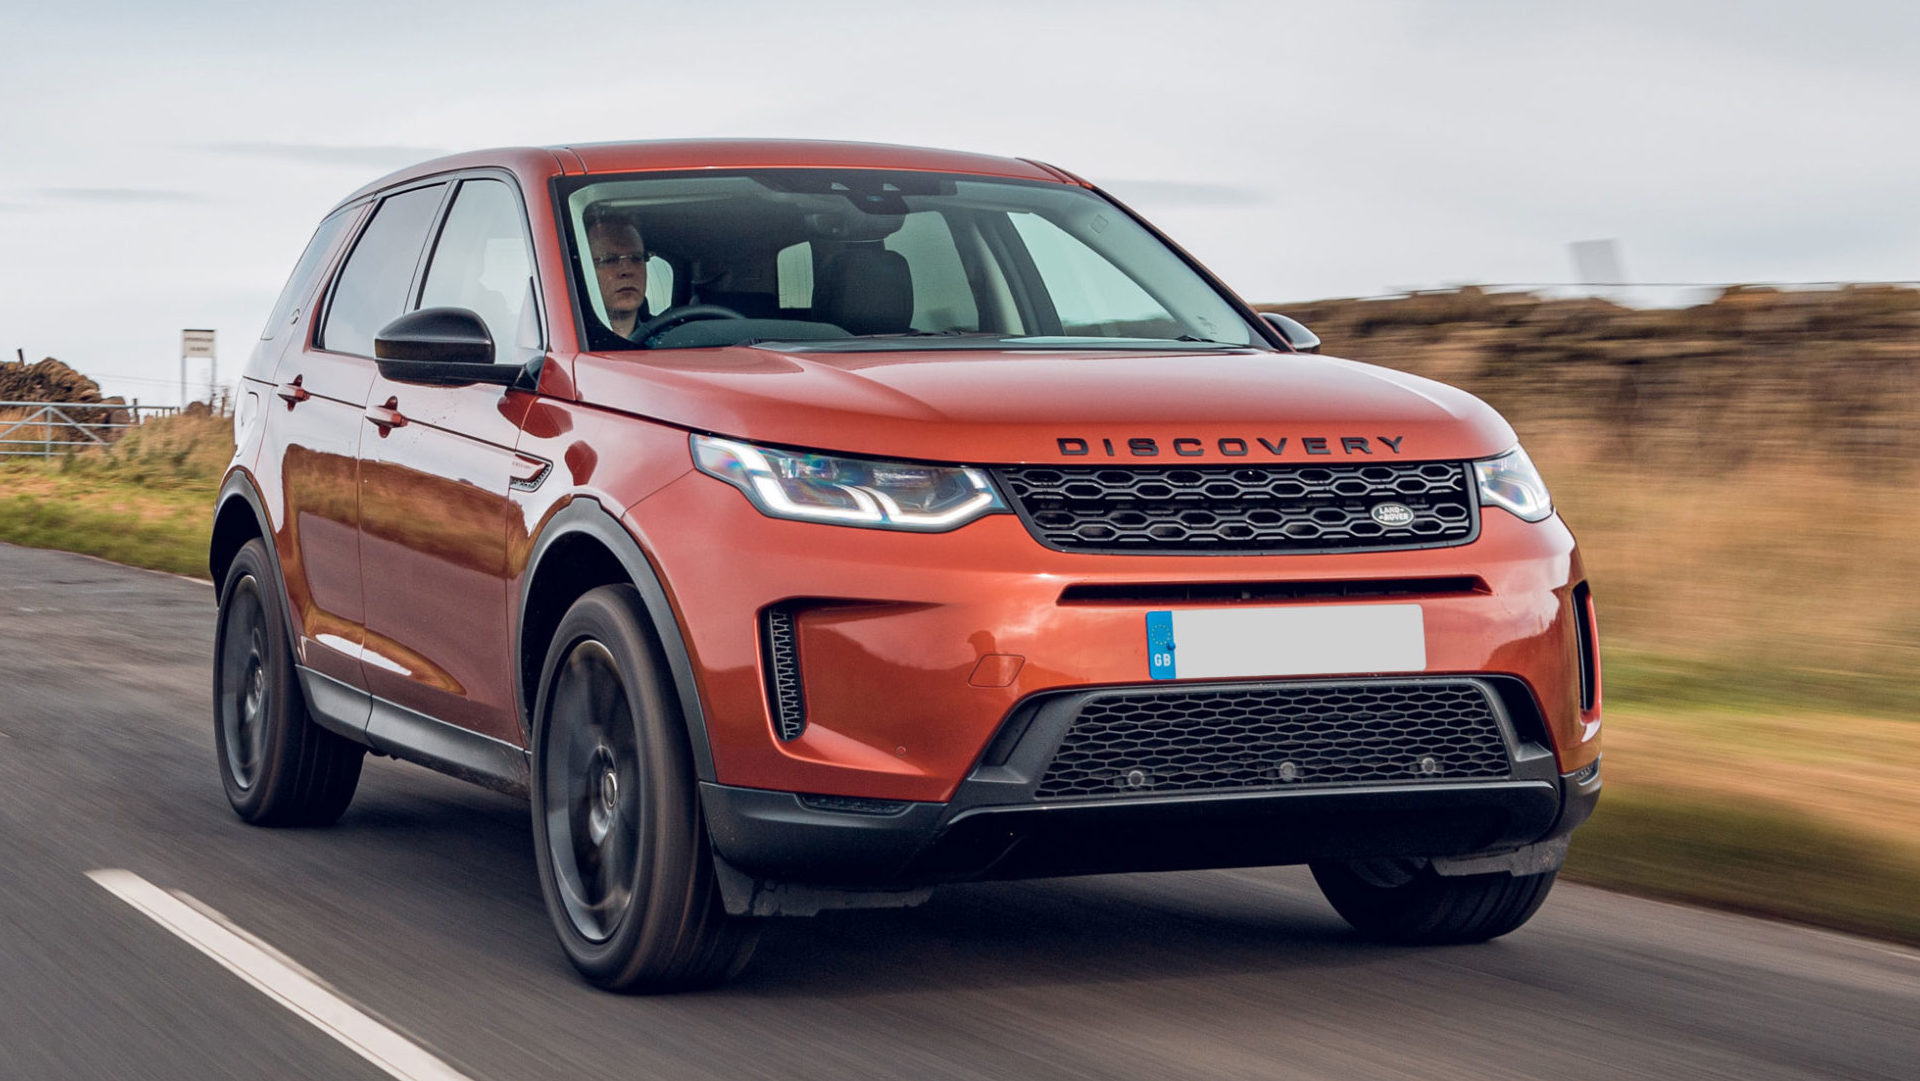 Land Rover vs Range Rover: What's the Difference?